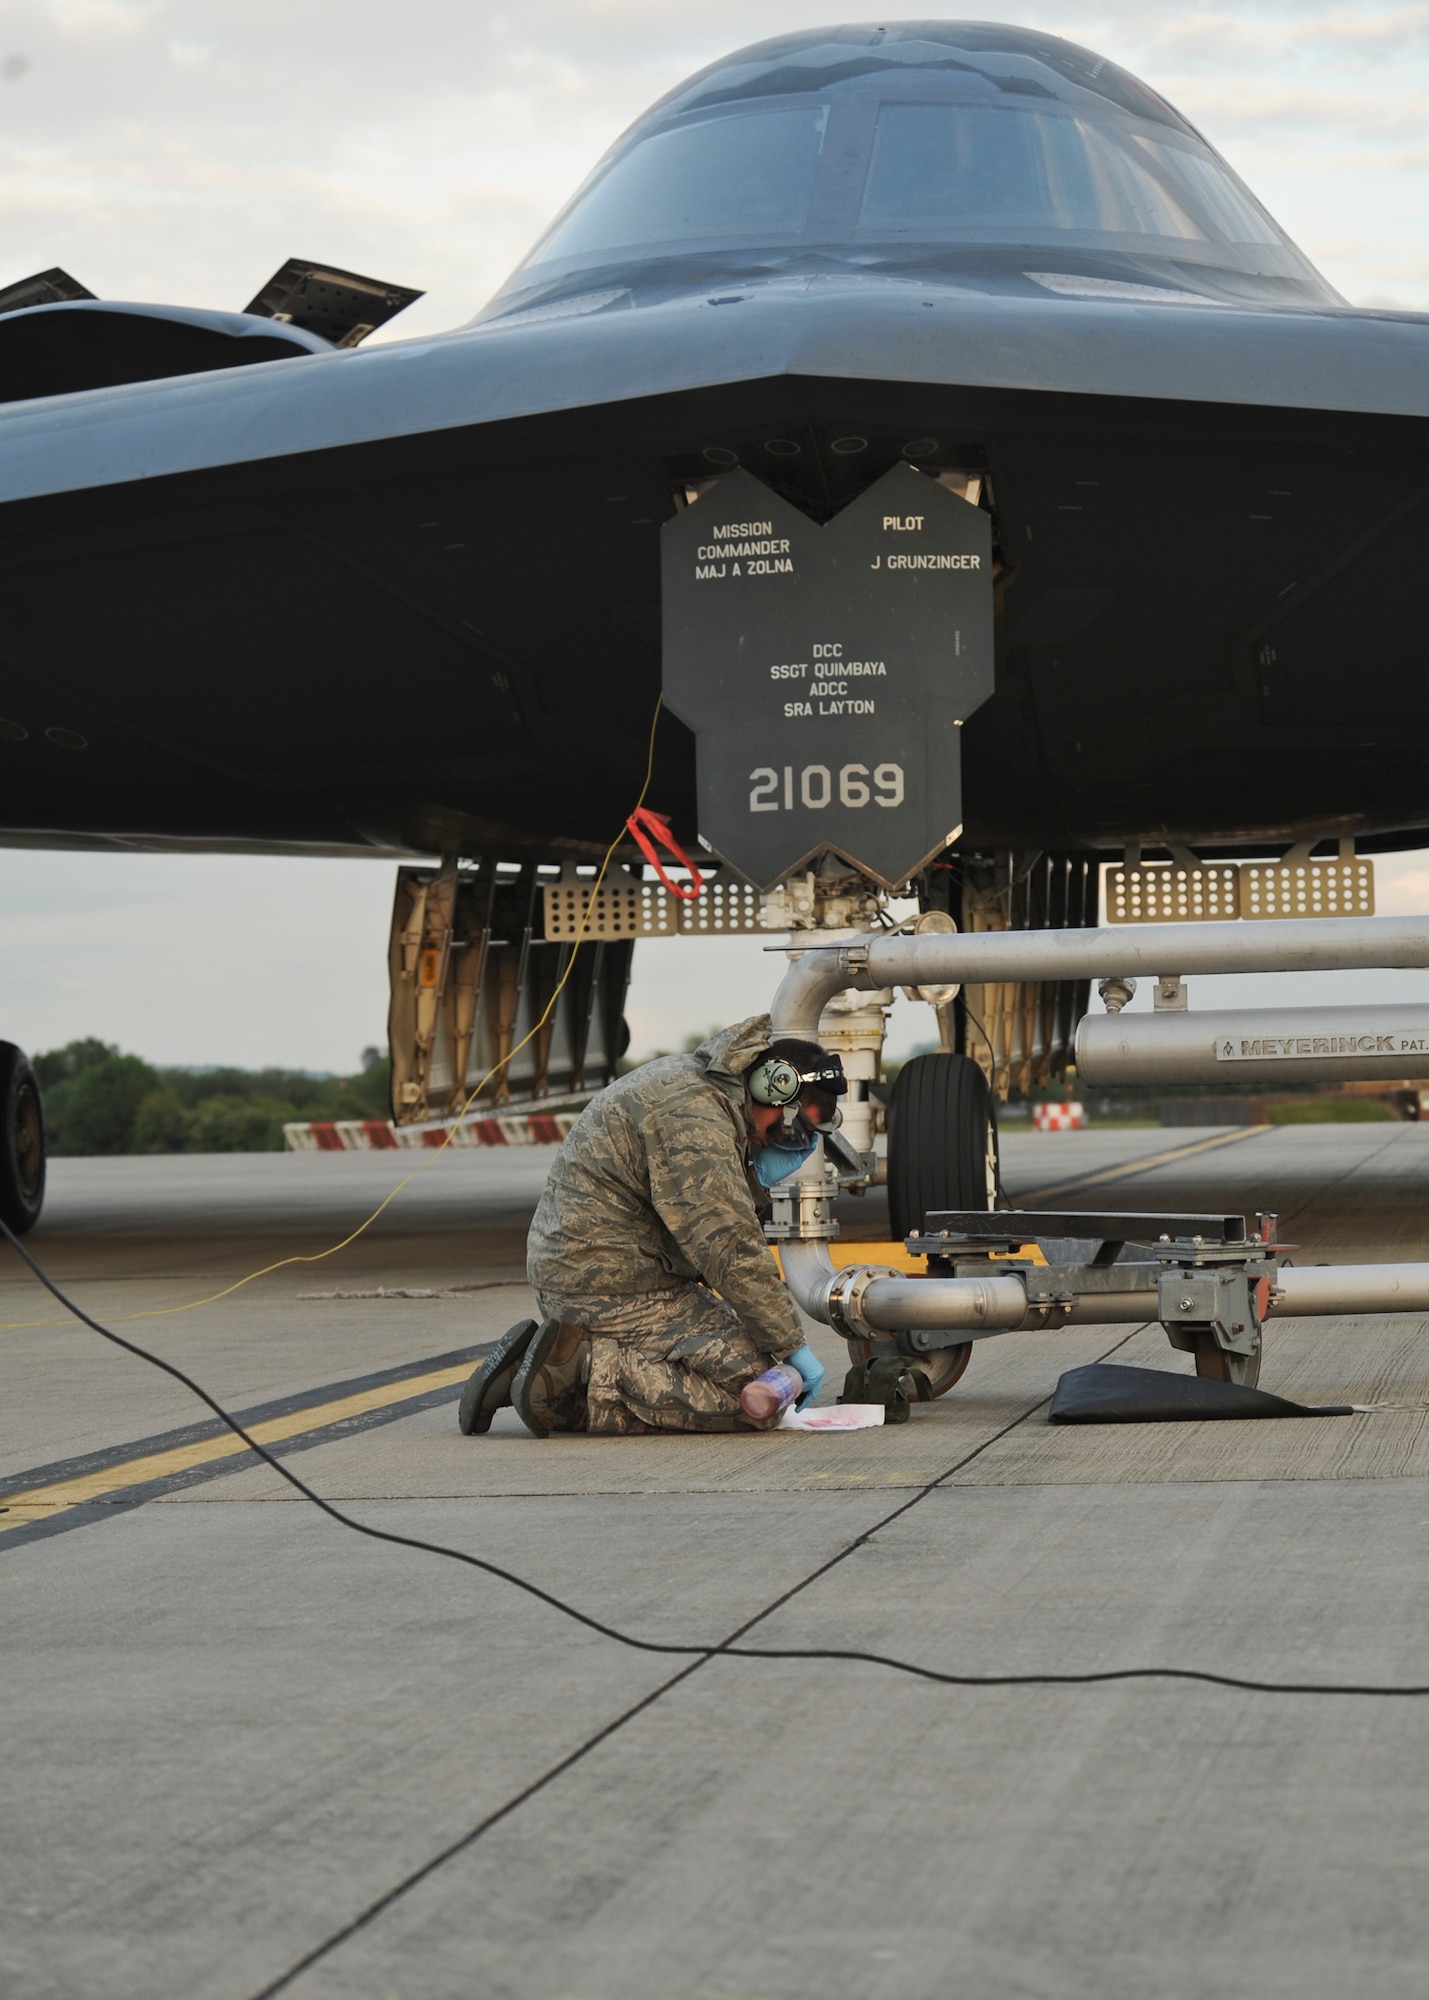 A 509th Aircraft Maintenance Squadron crew chief preps a B-2 Spirit for refueling at Royal Air Force Fairford, England, June 8, 2015. A hot-pit refueling was conducted after the B-2 Spirit landed on RAF Fairford, England, showcasing the capability of the aircraft to forward deploy and deliver a conventional and nuclear force anytime and anywhere. (U.S. Air Force photo/Capt. Christopher Mesnard)